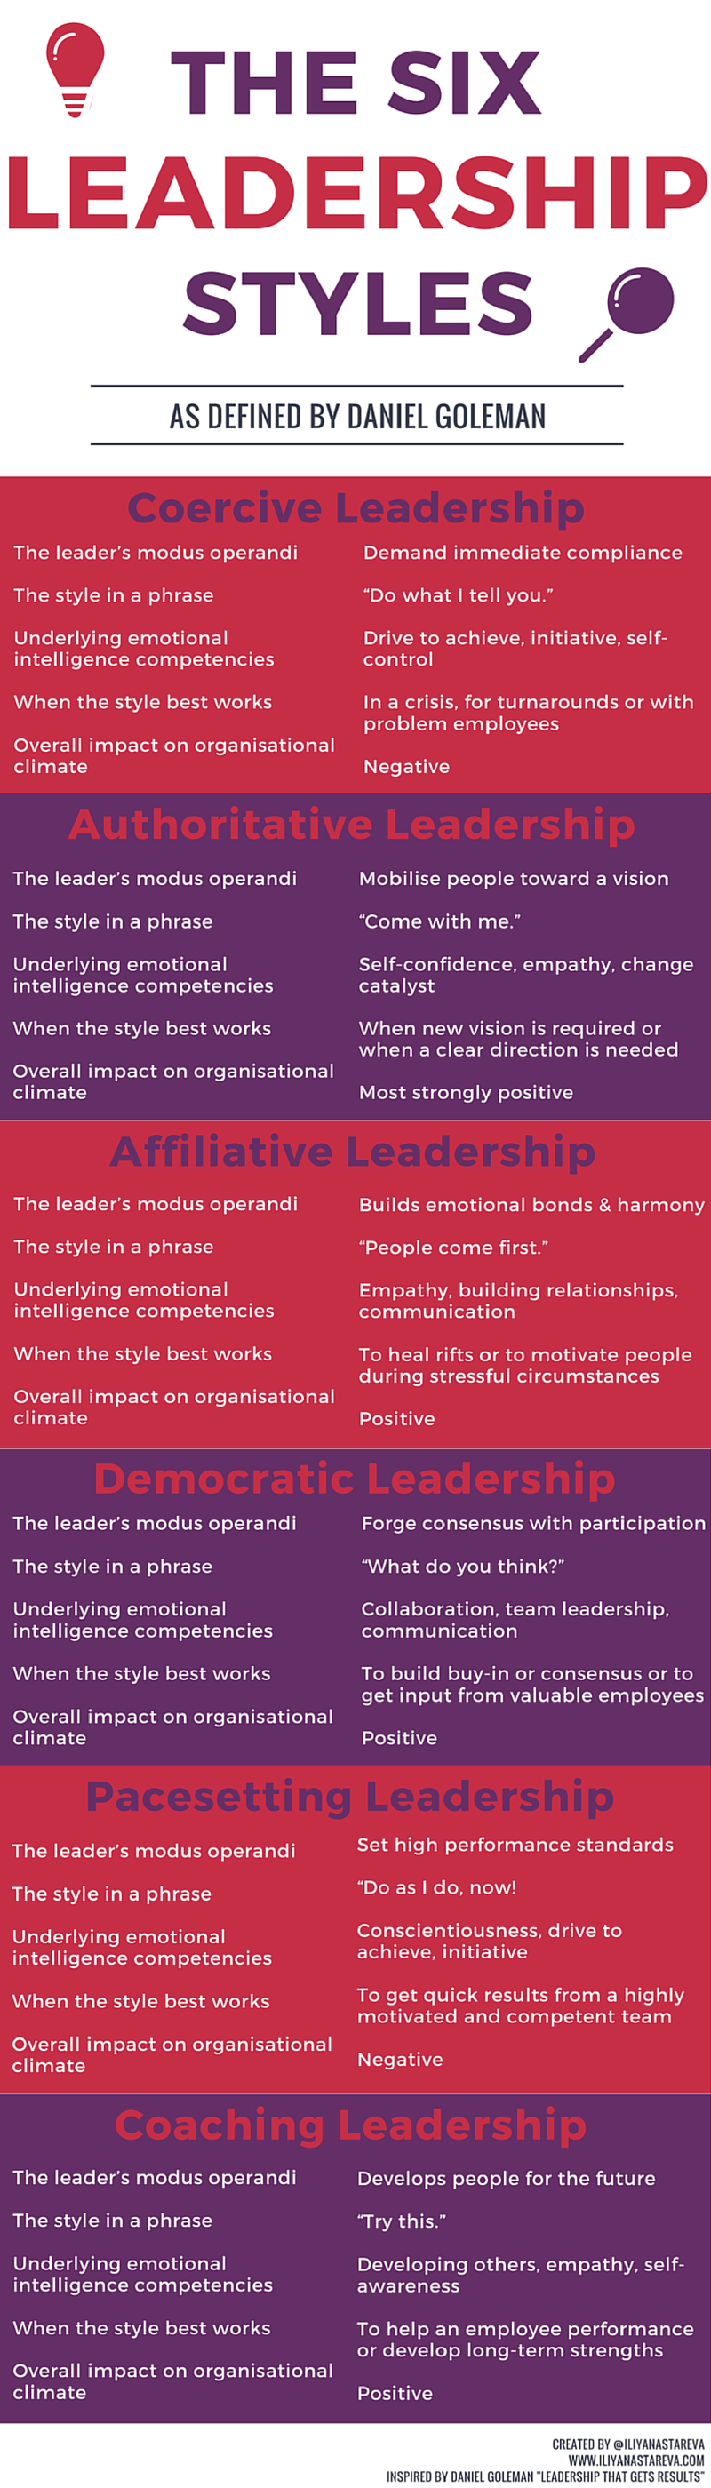 The Six Leadership Styles And How To Master Them [Infographic]